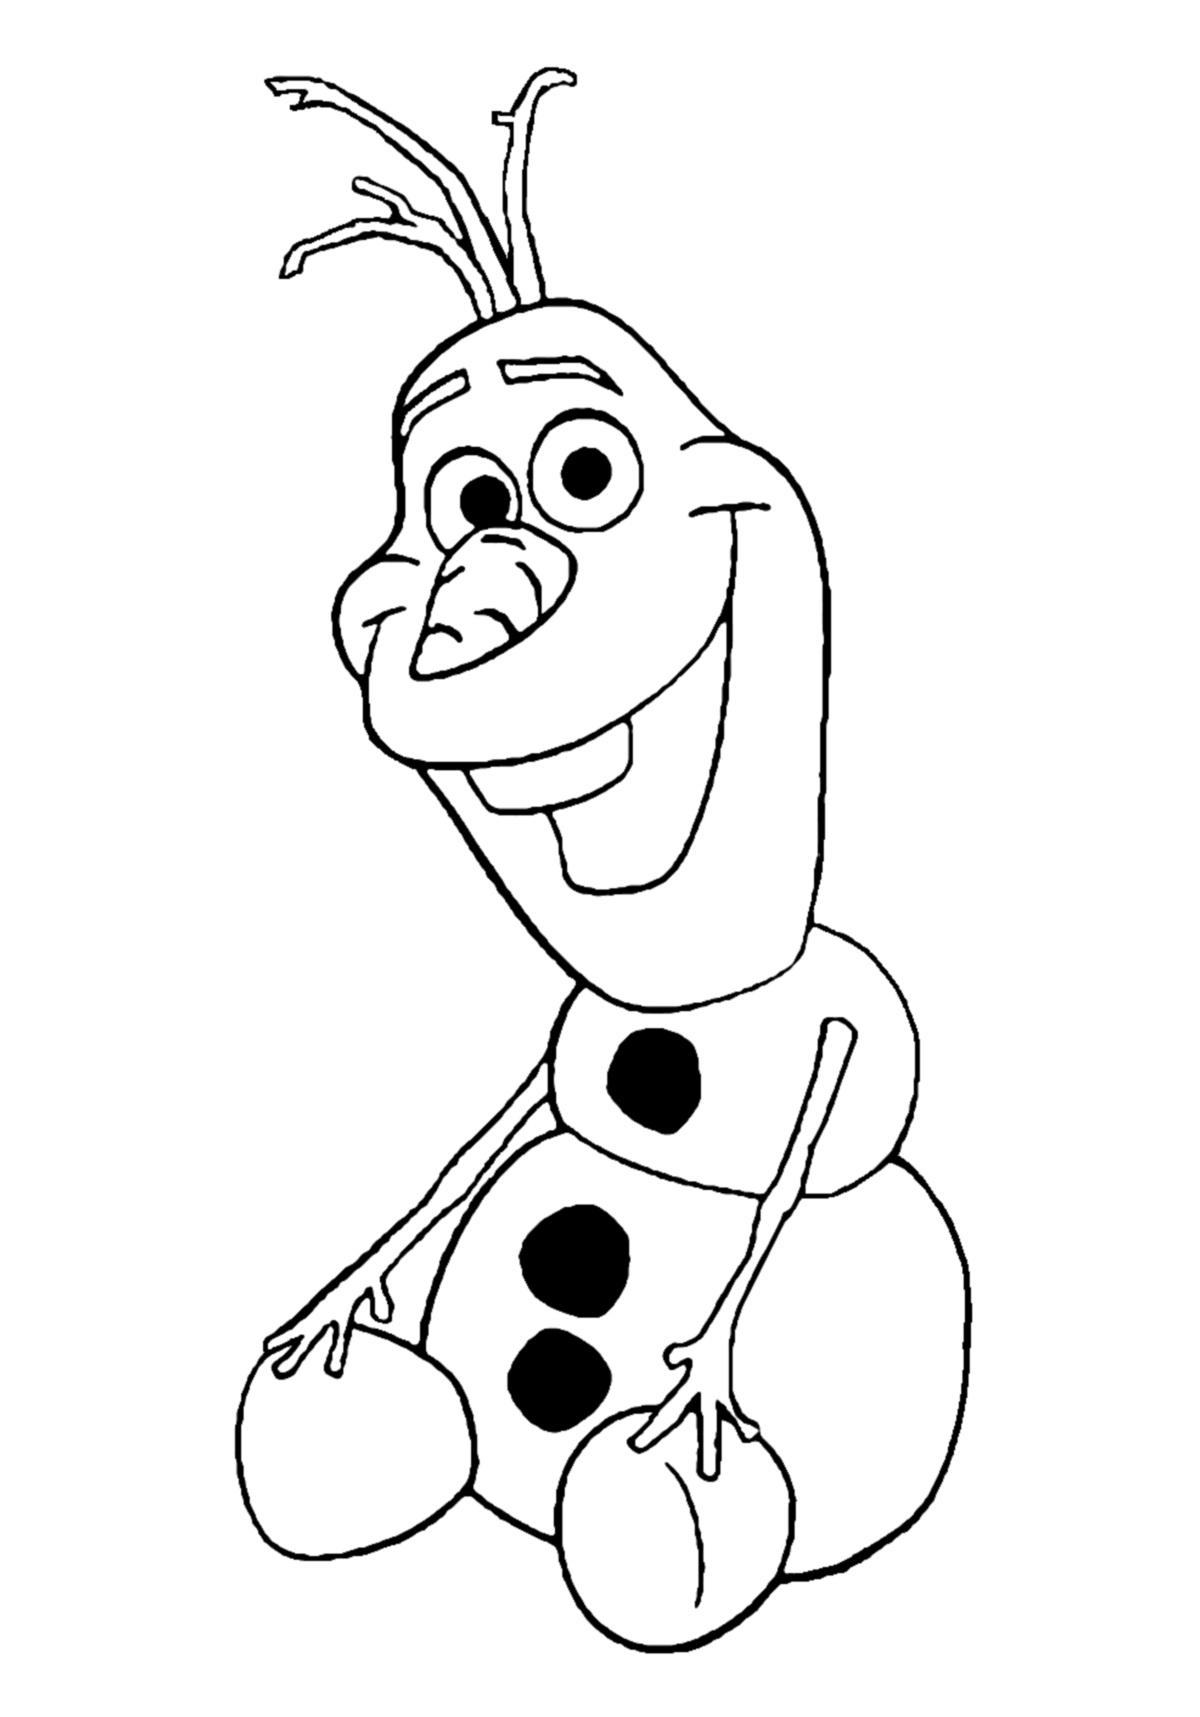 frozen to print frozen kids coloring pages